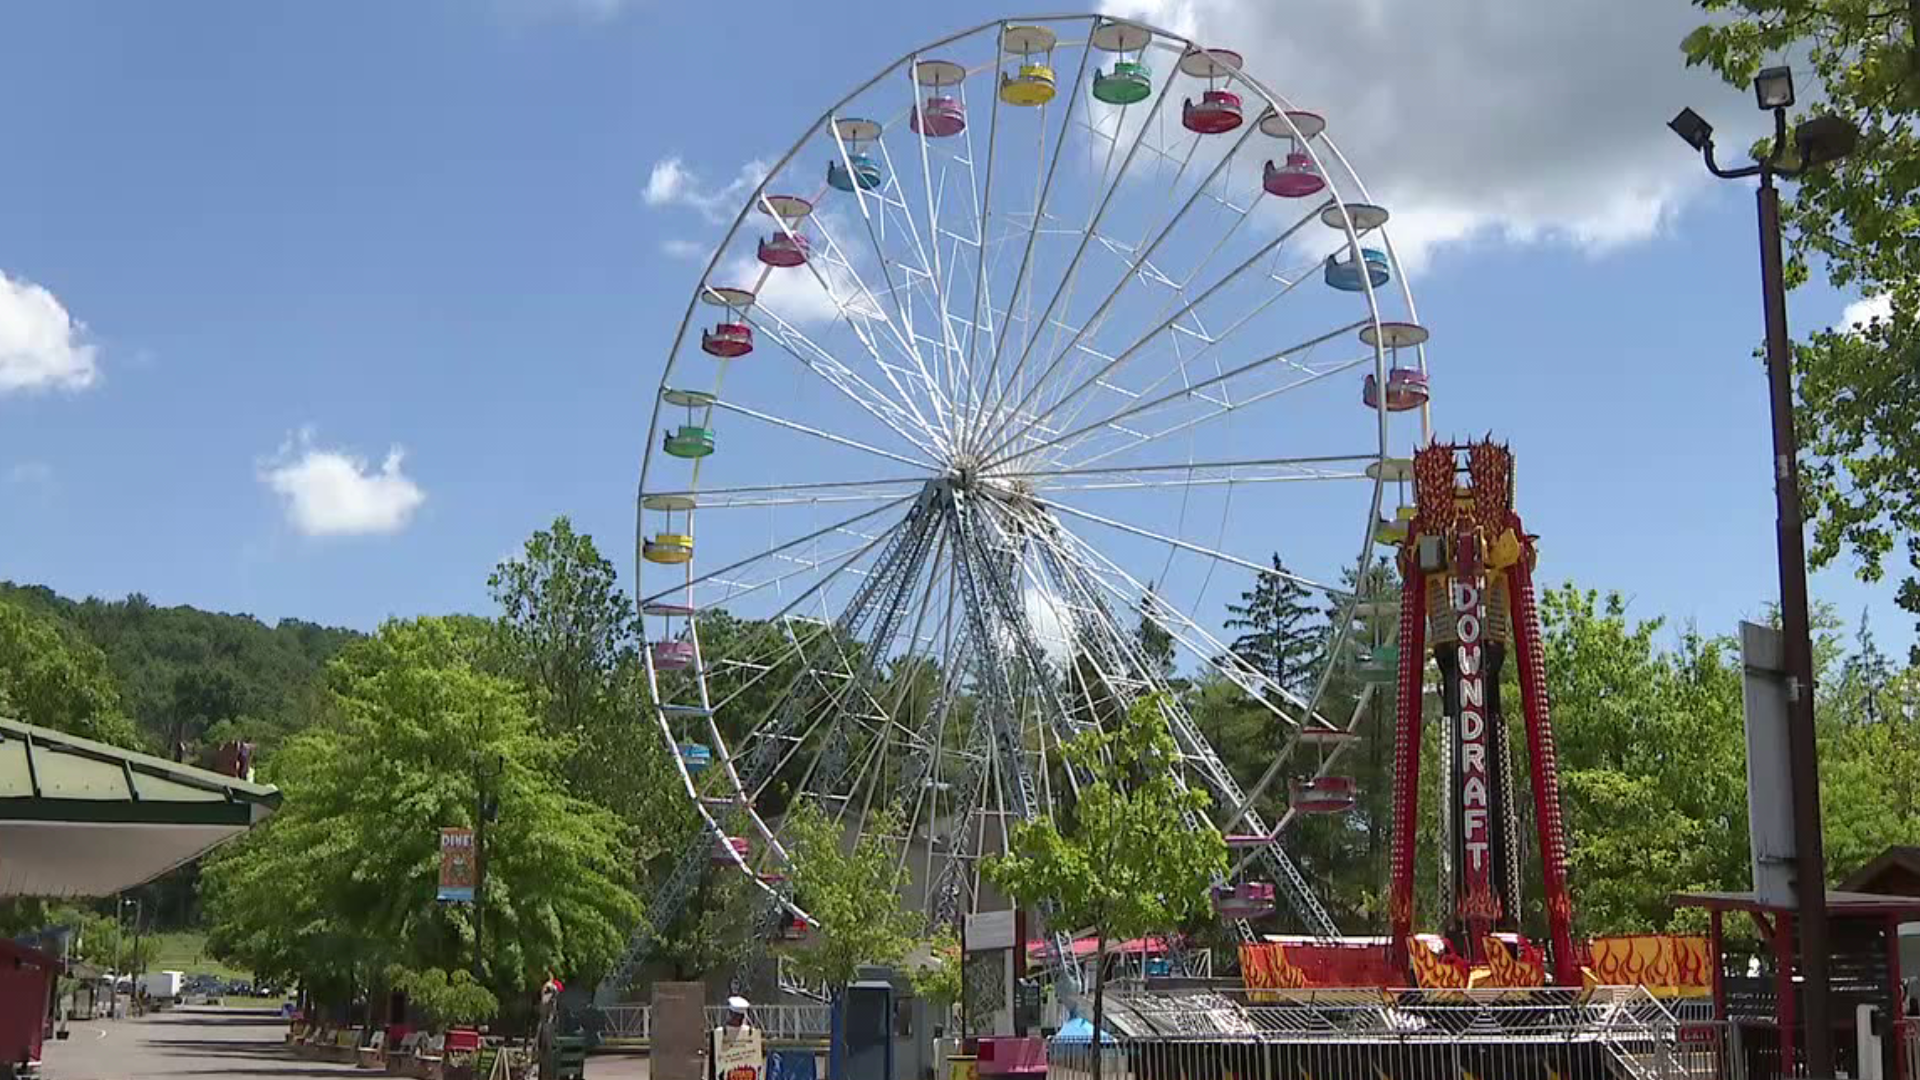 The amusement park opens for the season on Wednesday.